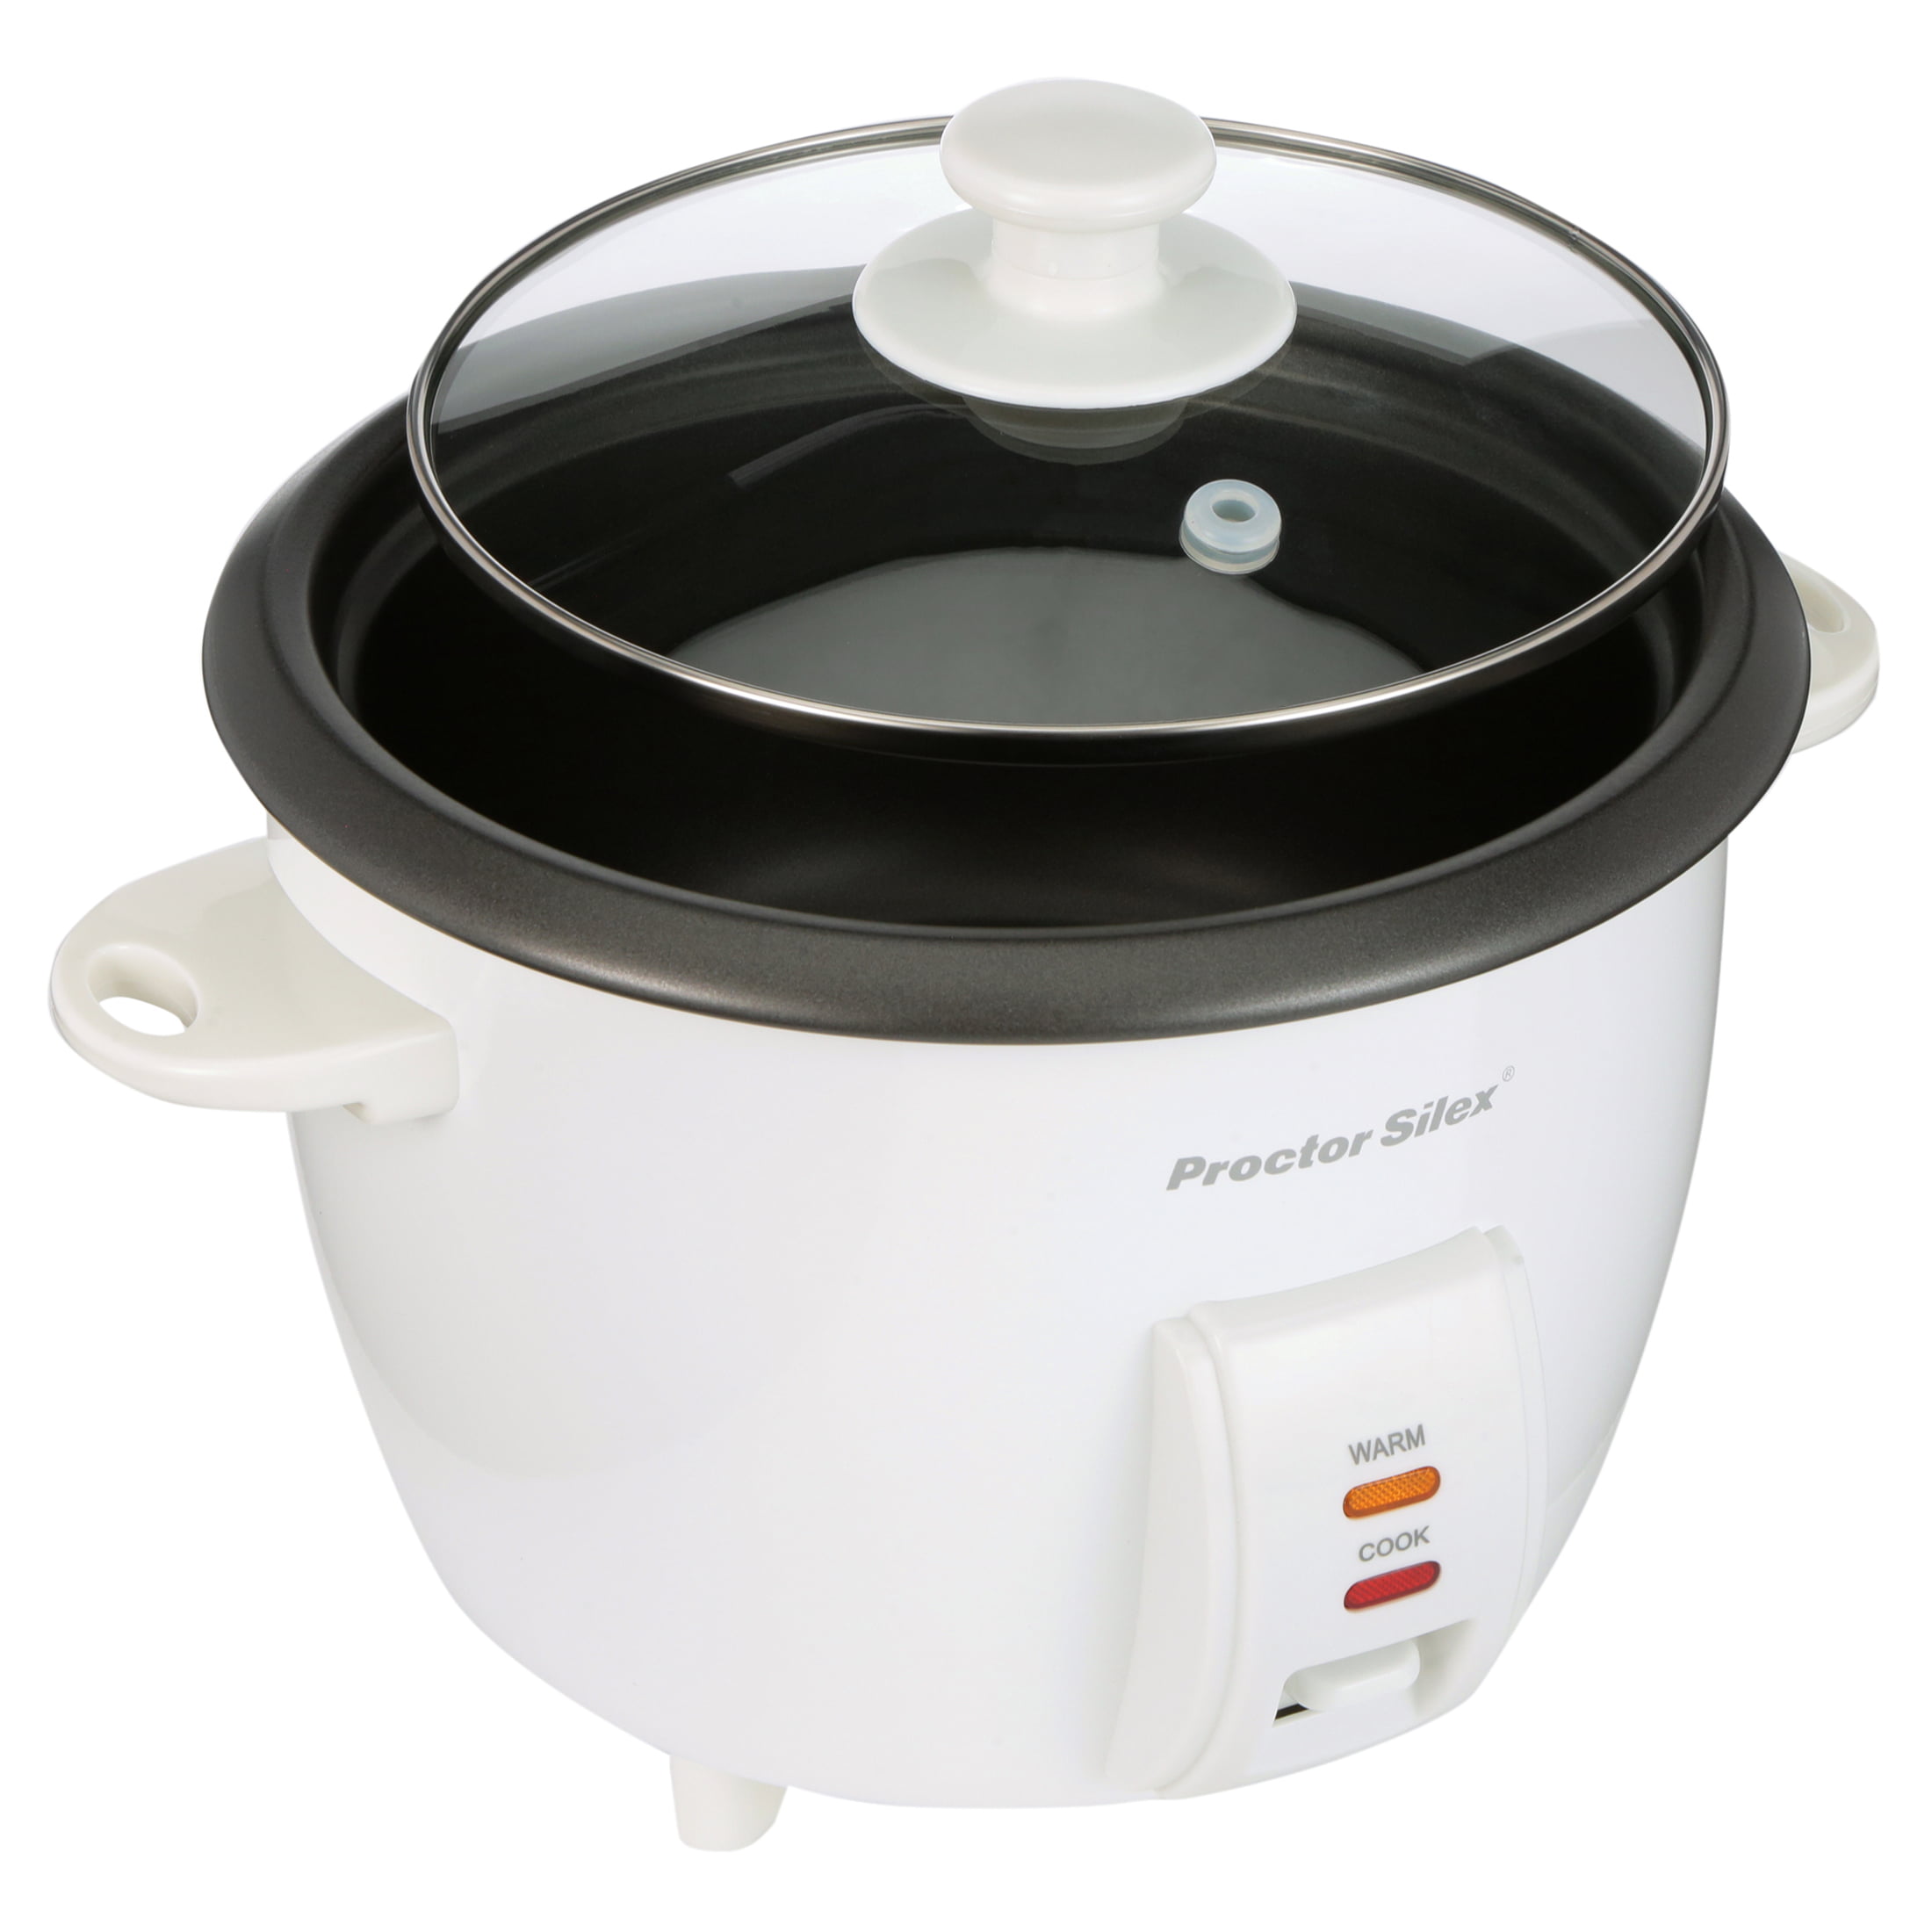 Proctor Silex 10 cup Rice Cooker &Steamer for Sale in Egg Harbor Township,  NJ - OfferUp